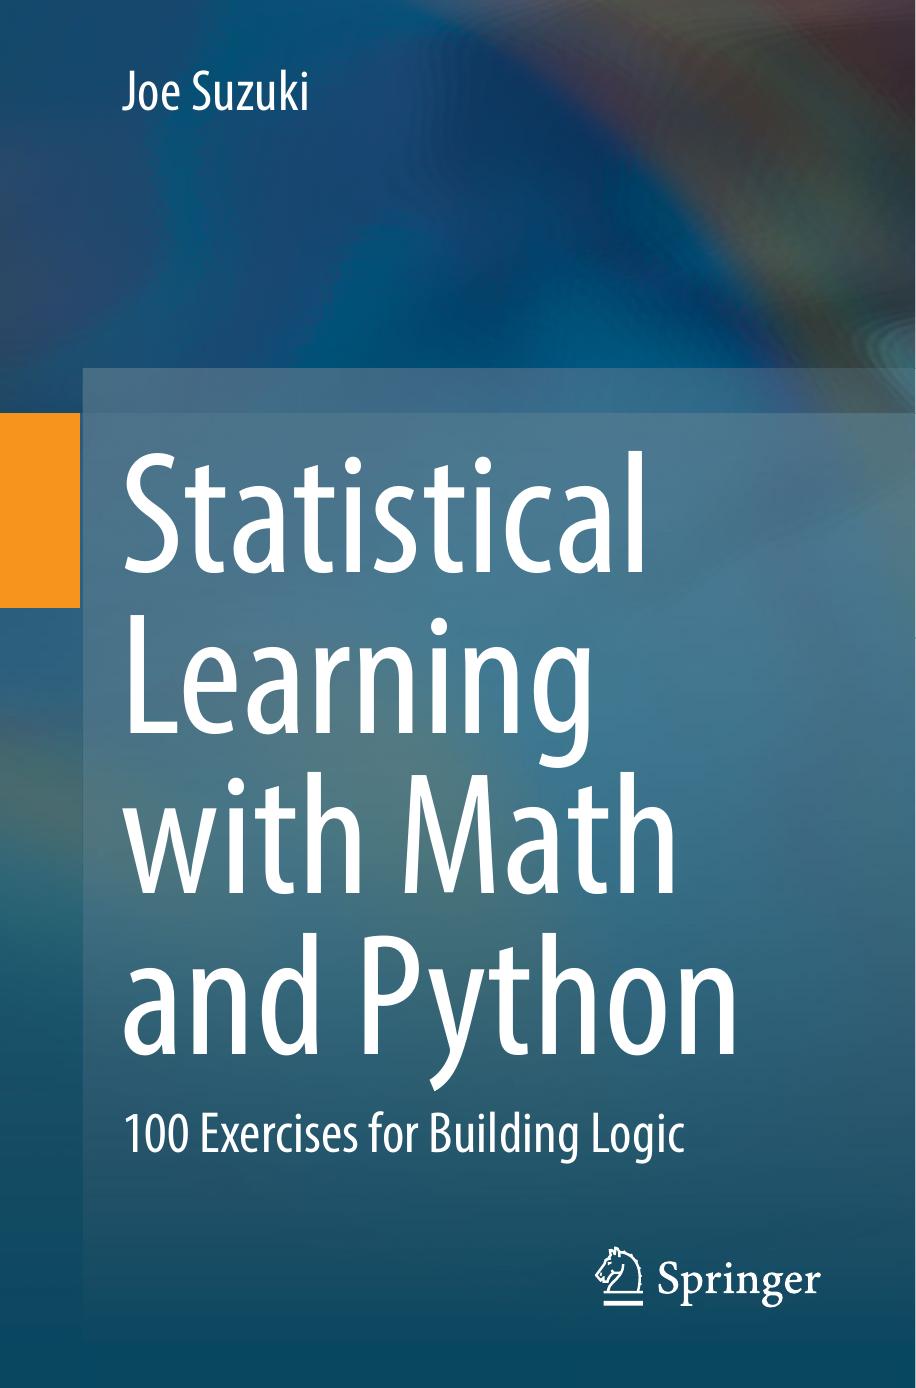 Statistical Learning With Math and Python: 100 Exercises for Building Logic